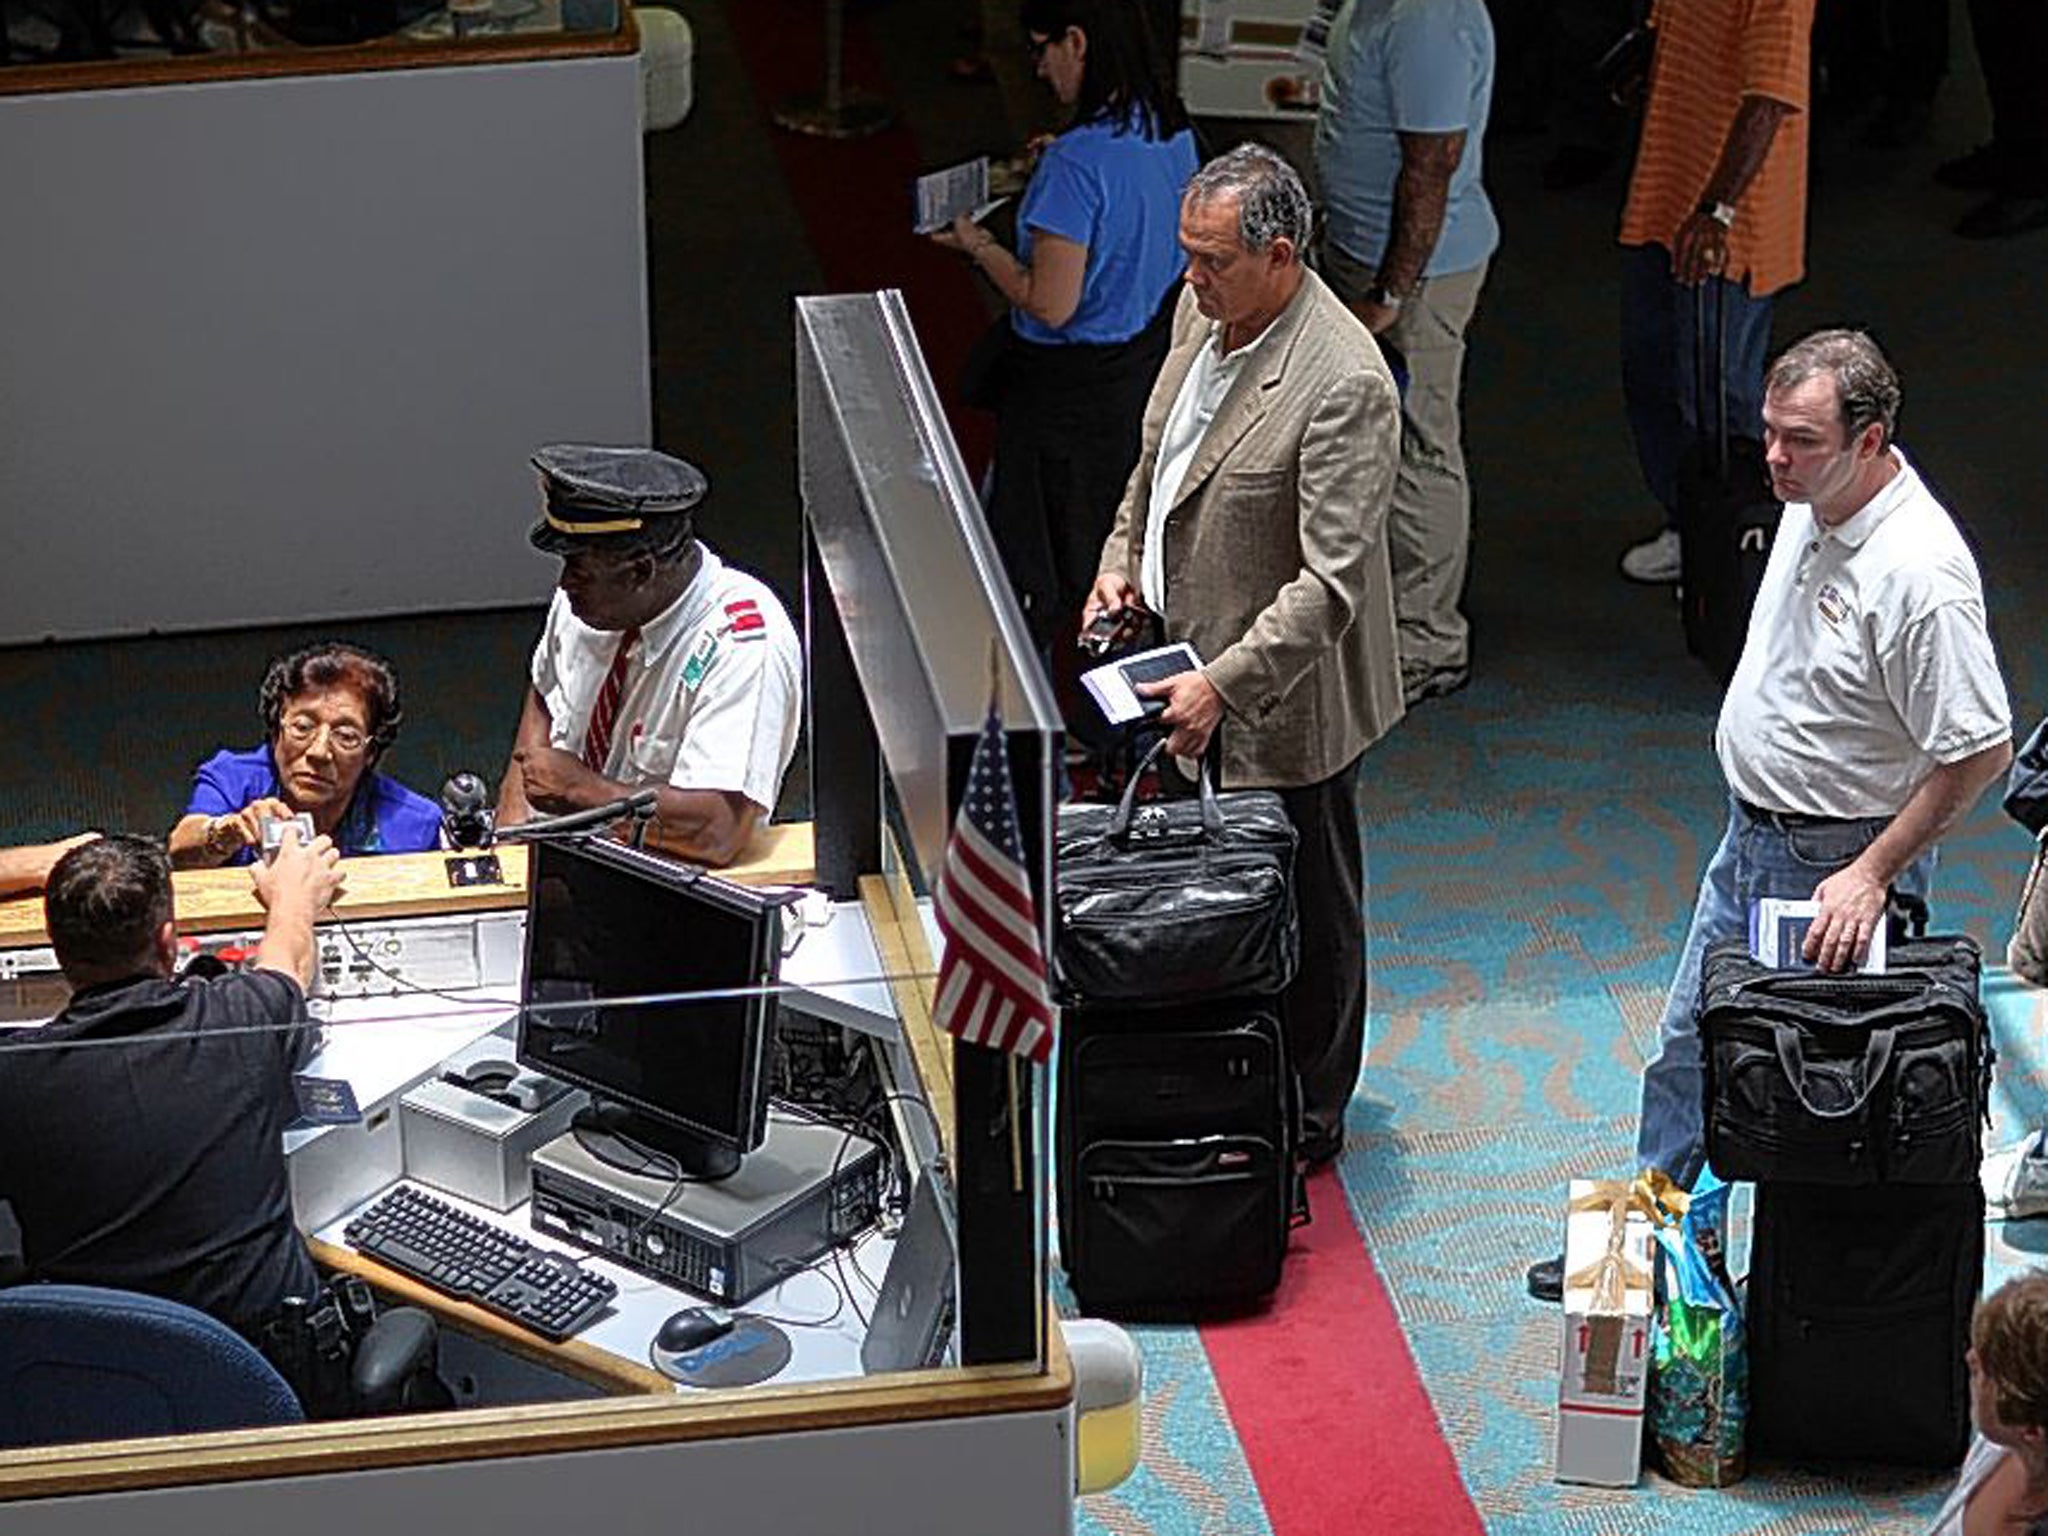 Checkpoint alpha: admission rules are strict in the US